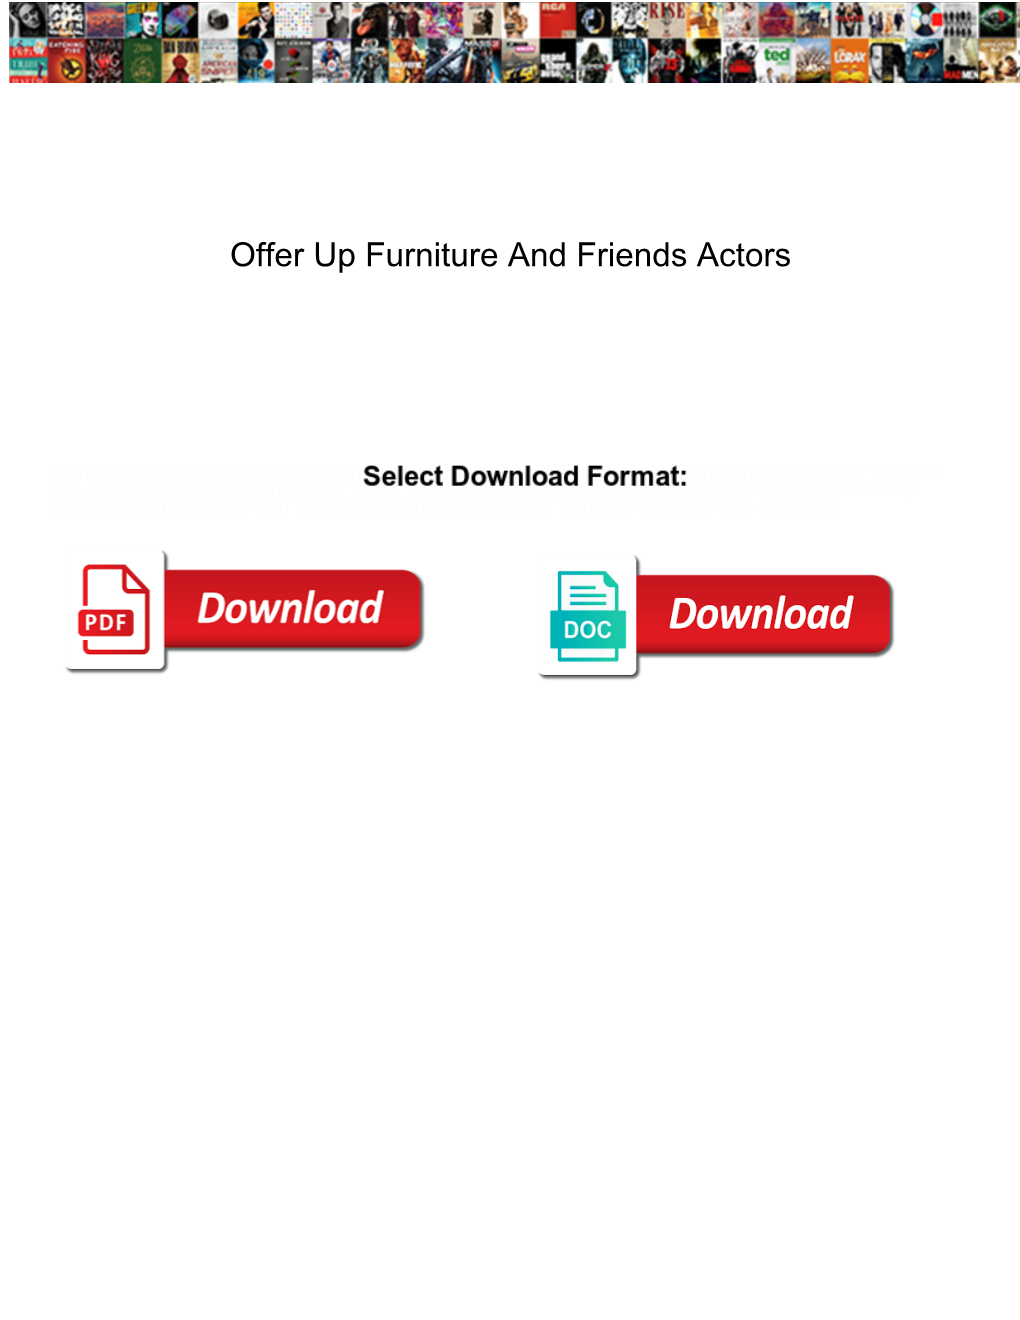 Offer up Furniture and Friends Actors